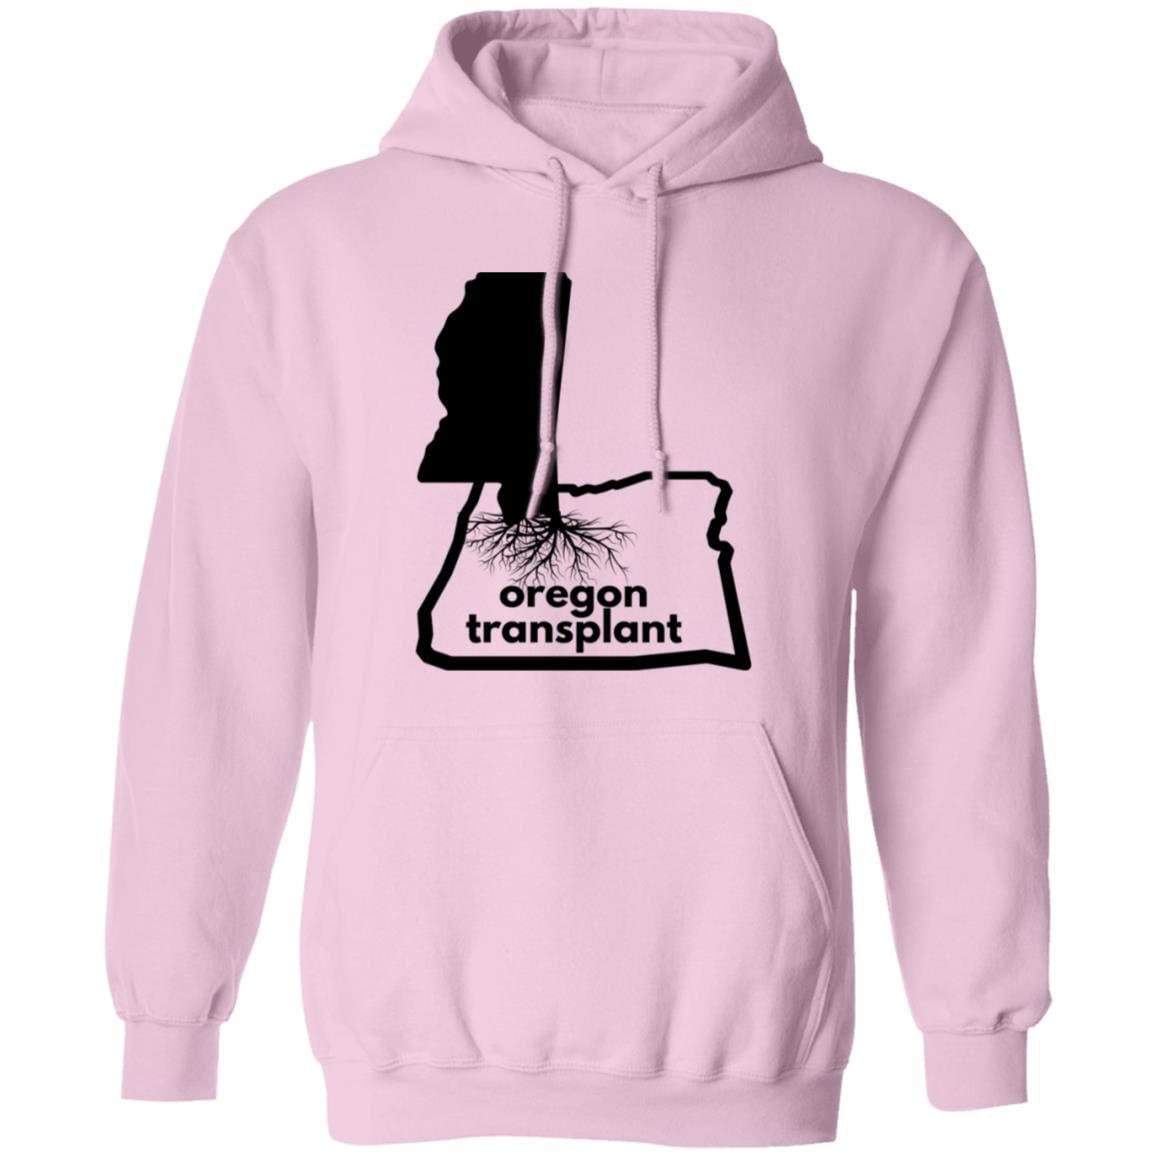 Oregon Transplant Pullover Hoodie, Customizable, for men or women, present for going away, retirement, housewarming, birthday, appreciation